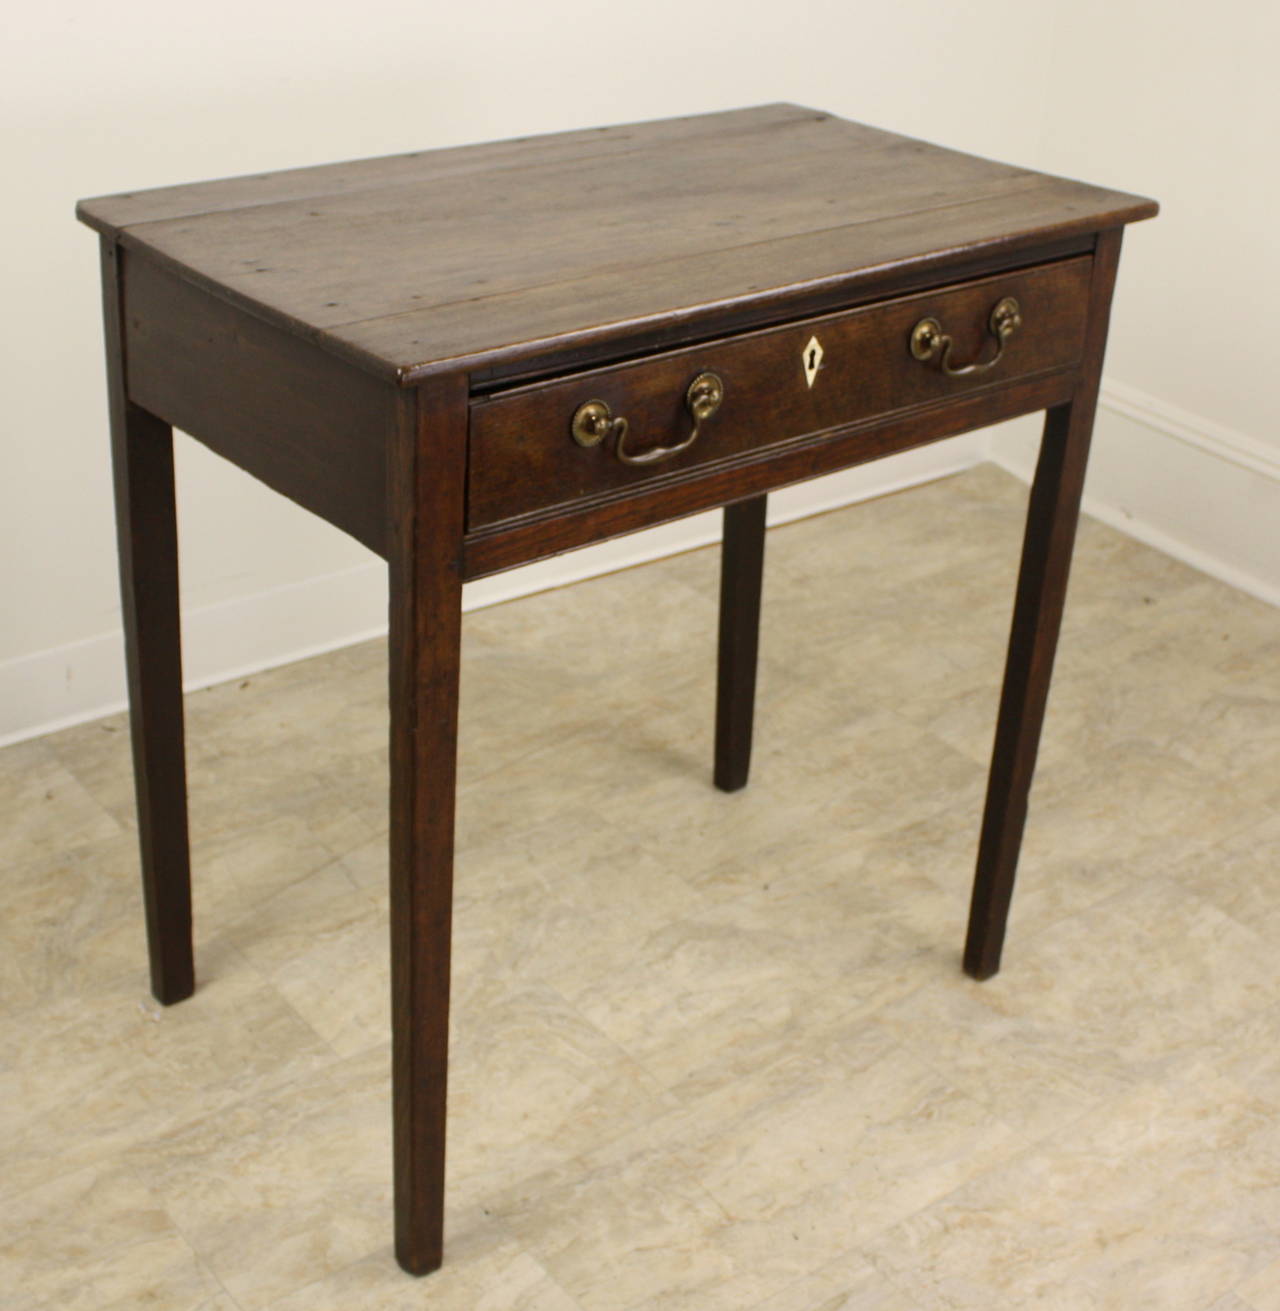 This early Welsh table is very classically lined, with lovely slender tapered legs and a large drawer across the front, with cock-beading edge, and a very nice escutcheon. The wood is a rich dark oak.  It would make a fine little desk, as the apron